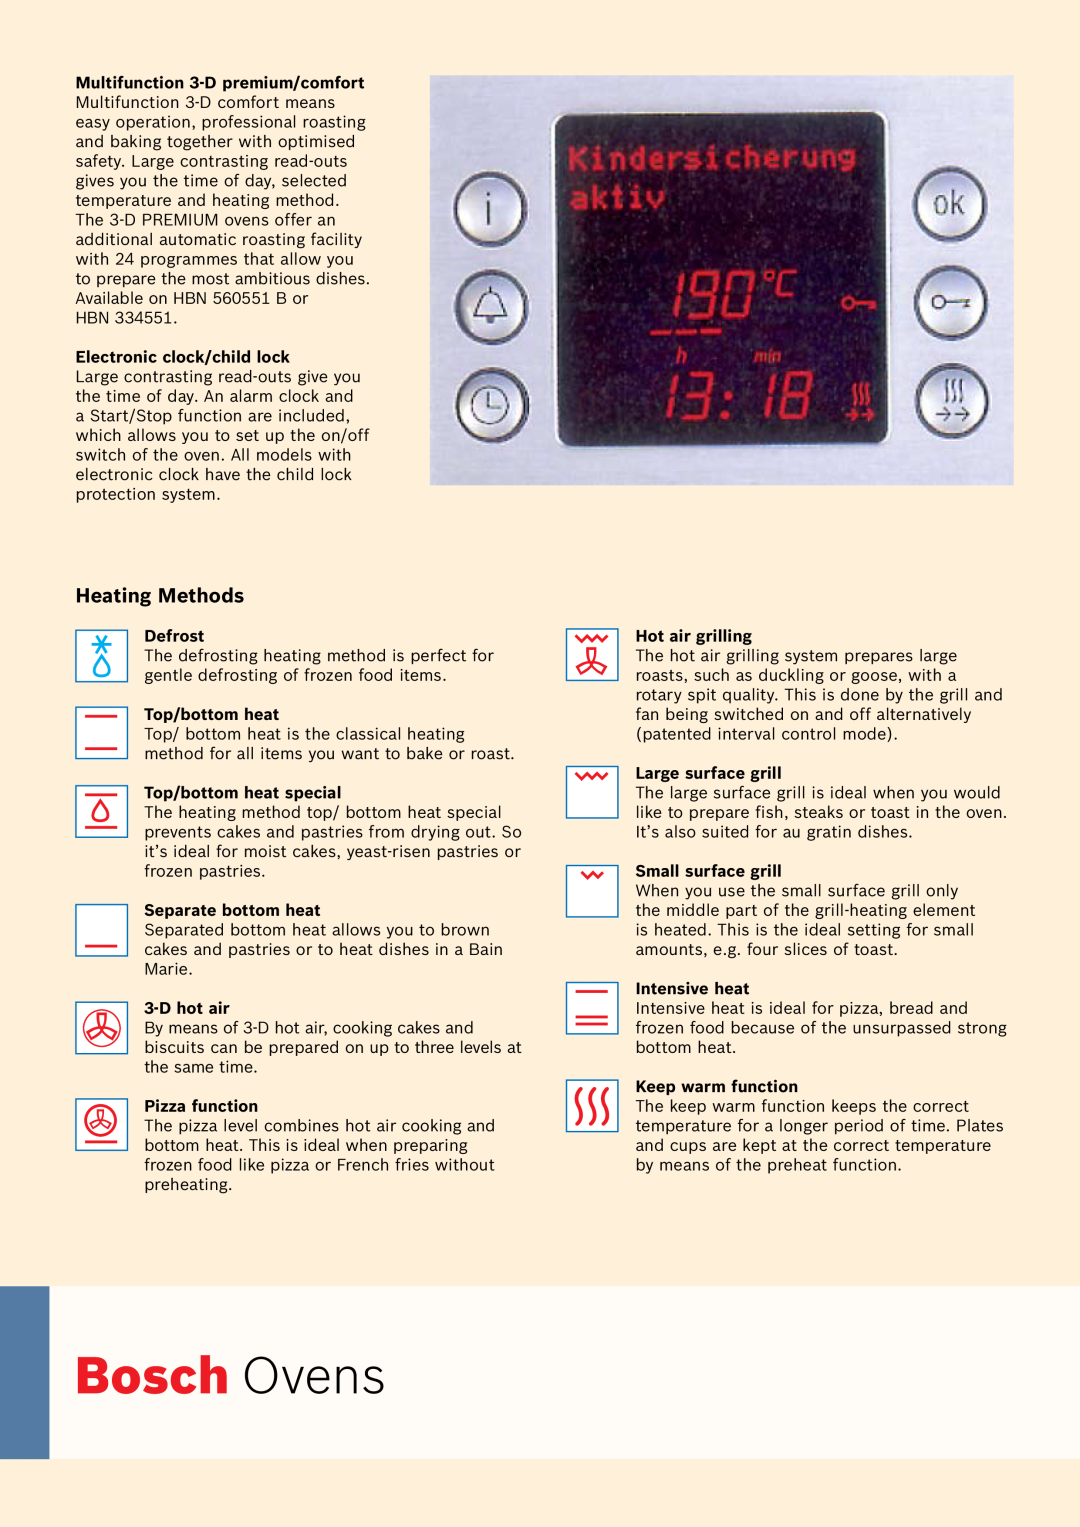 Bosch Appliances Oven Carriage manual Bosch Ovens, Heating Methods, Electronic clock/child lock, Defrost, Top/bottom heat 